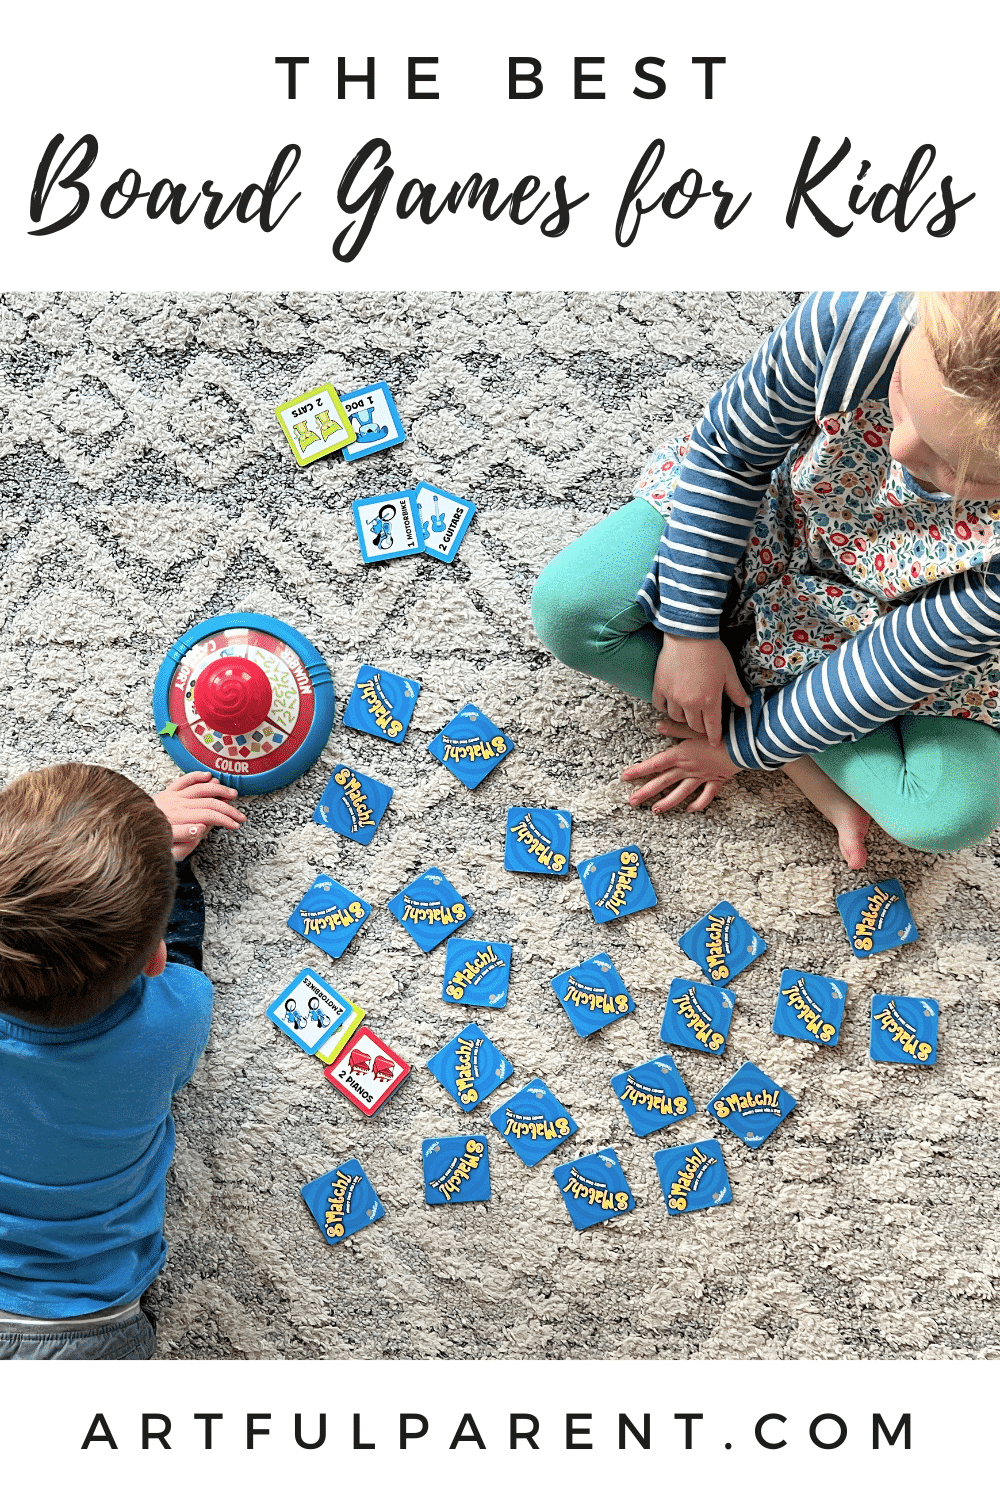 The BEST Board Games for Families